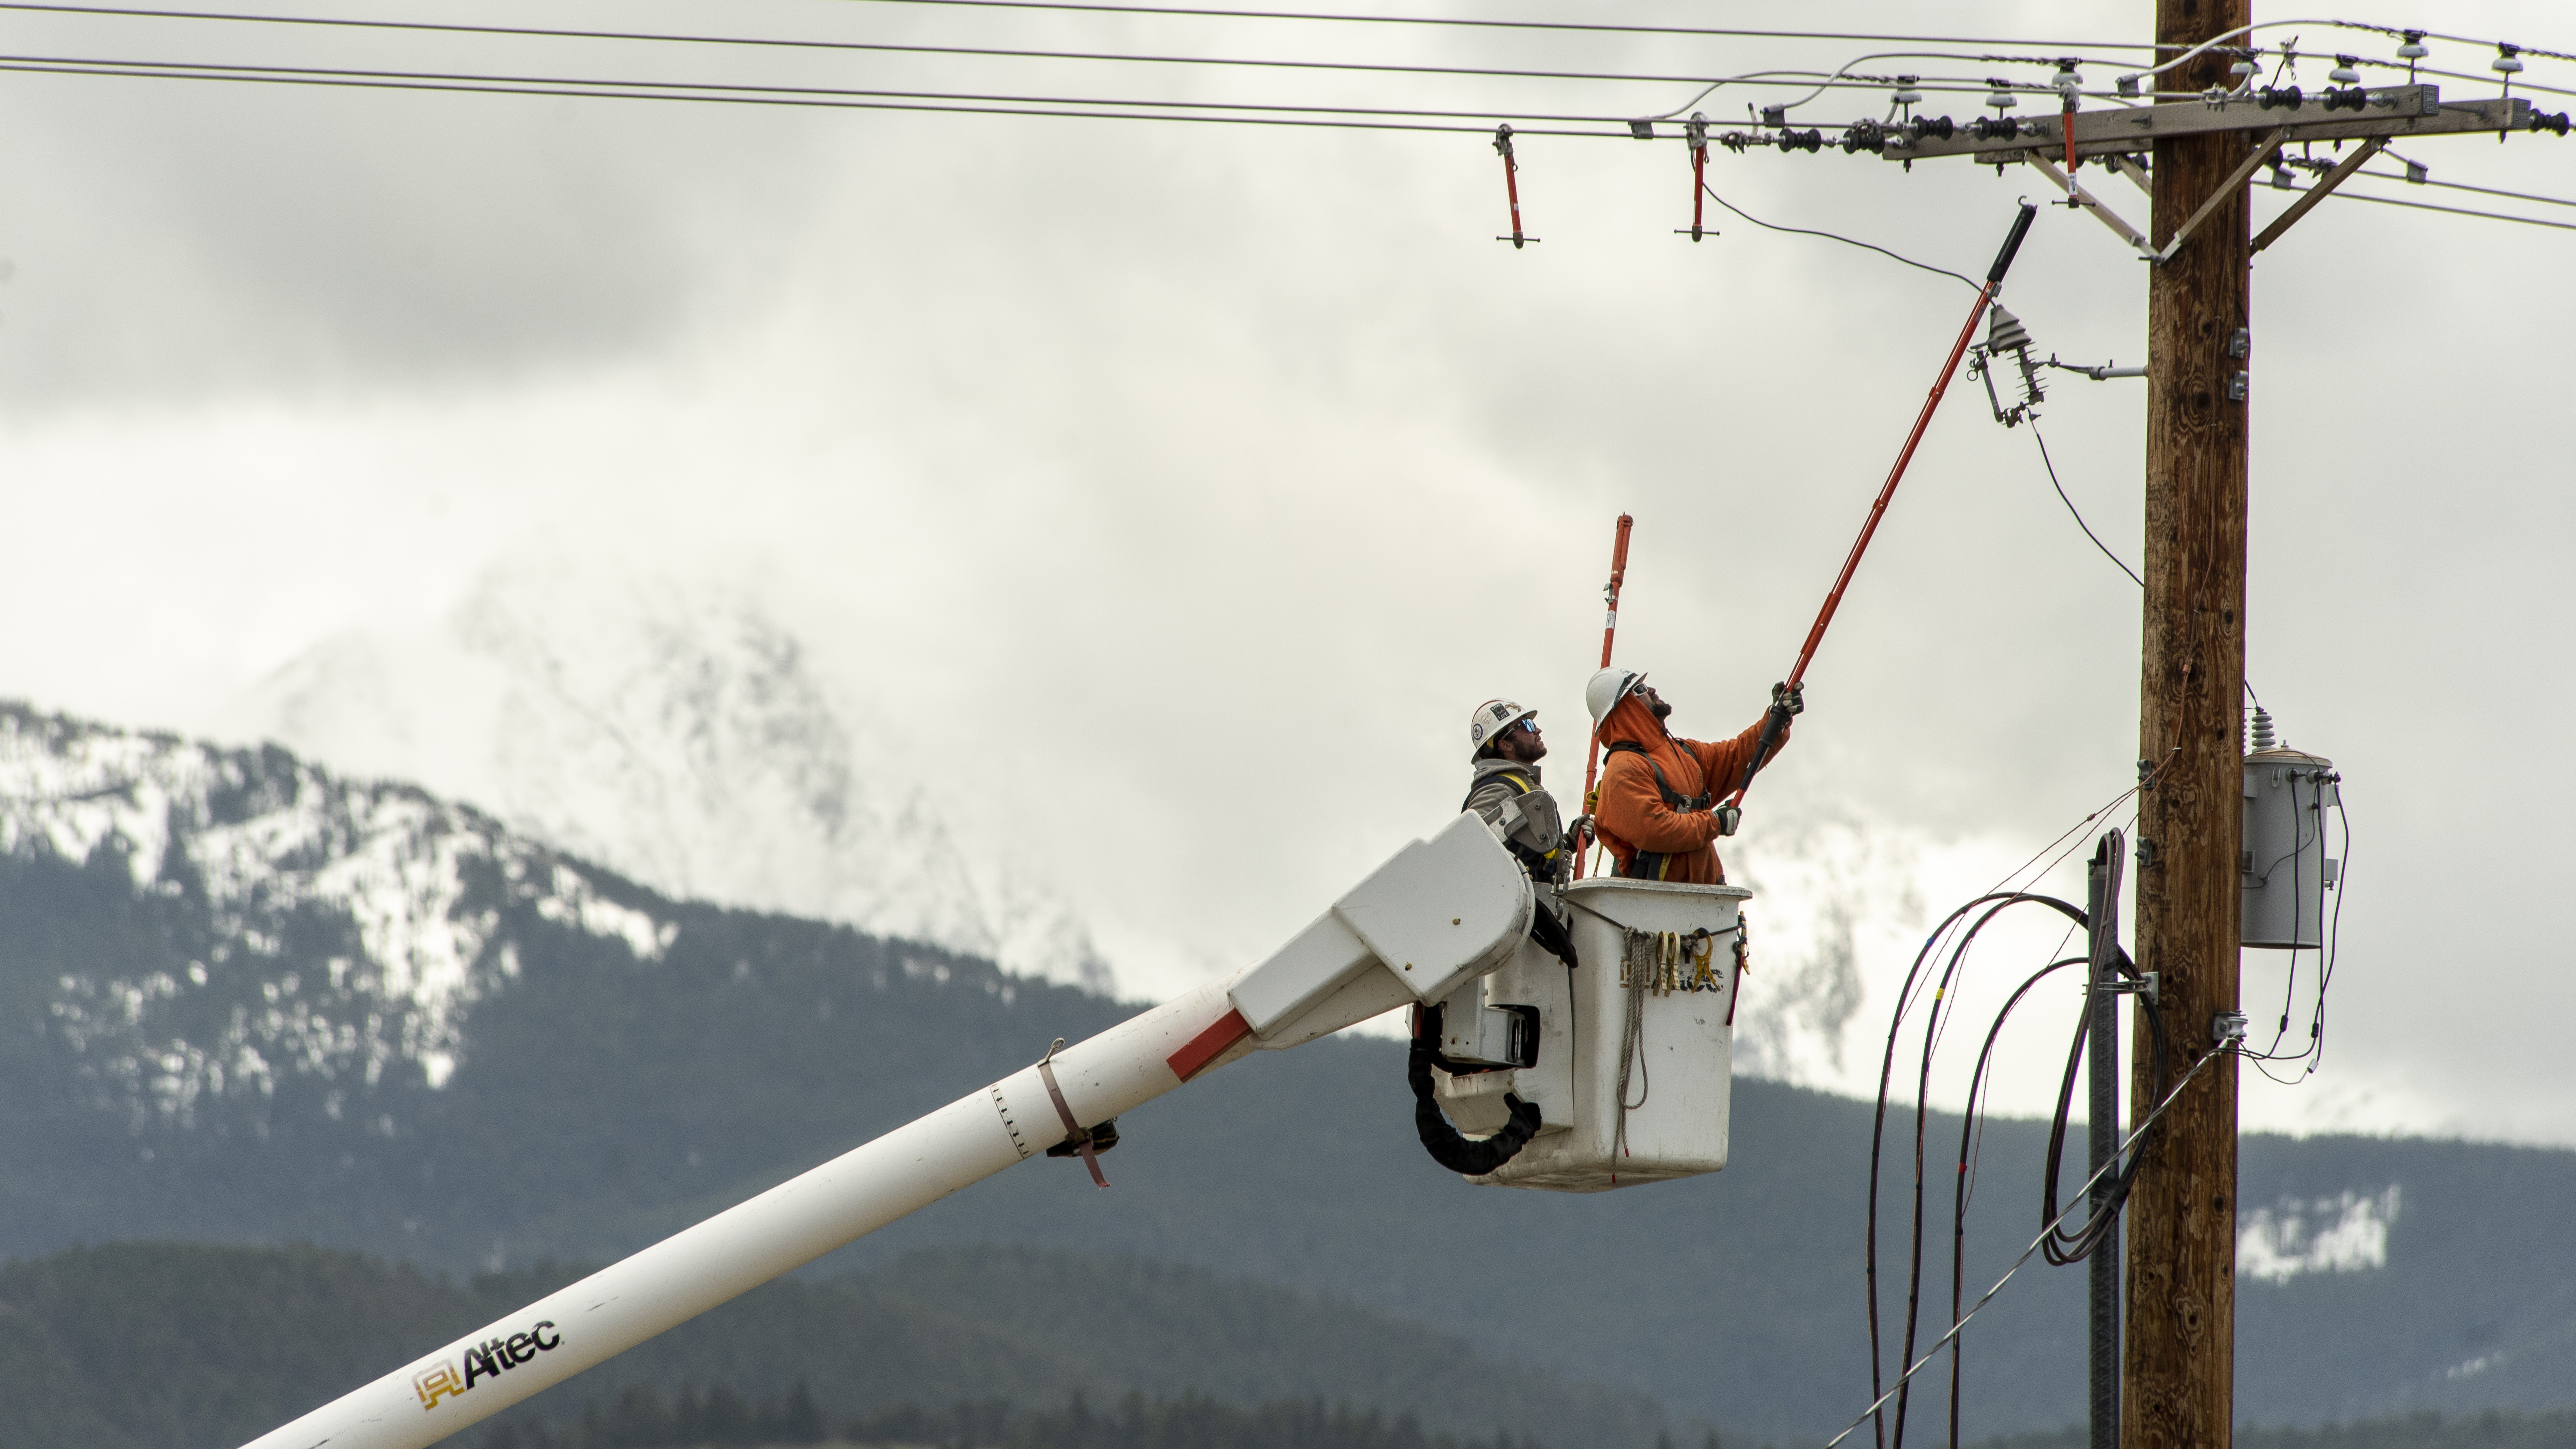 Electric workers in a boom lift work on a transmission line with a snow-capped mountain in the background.